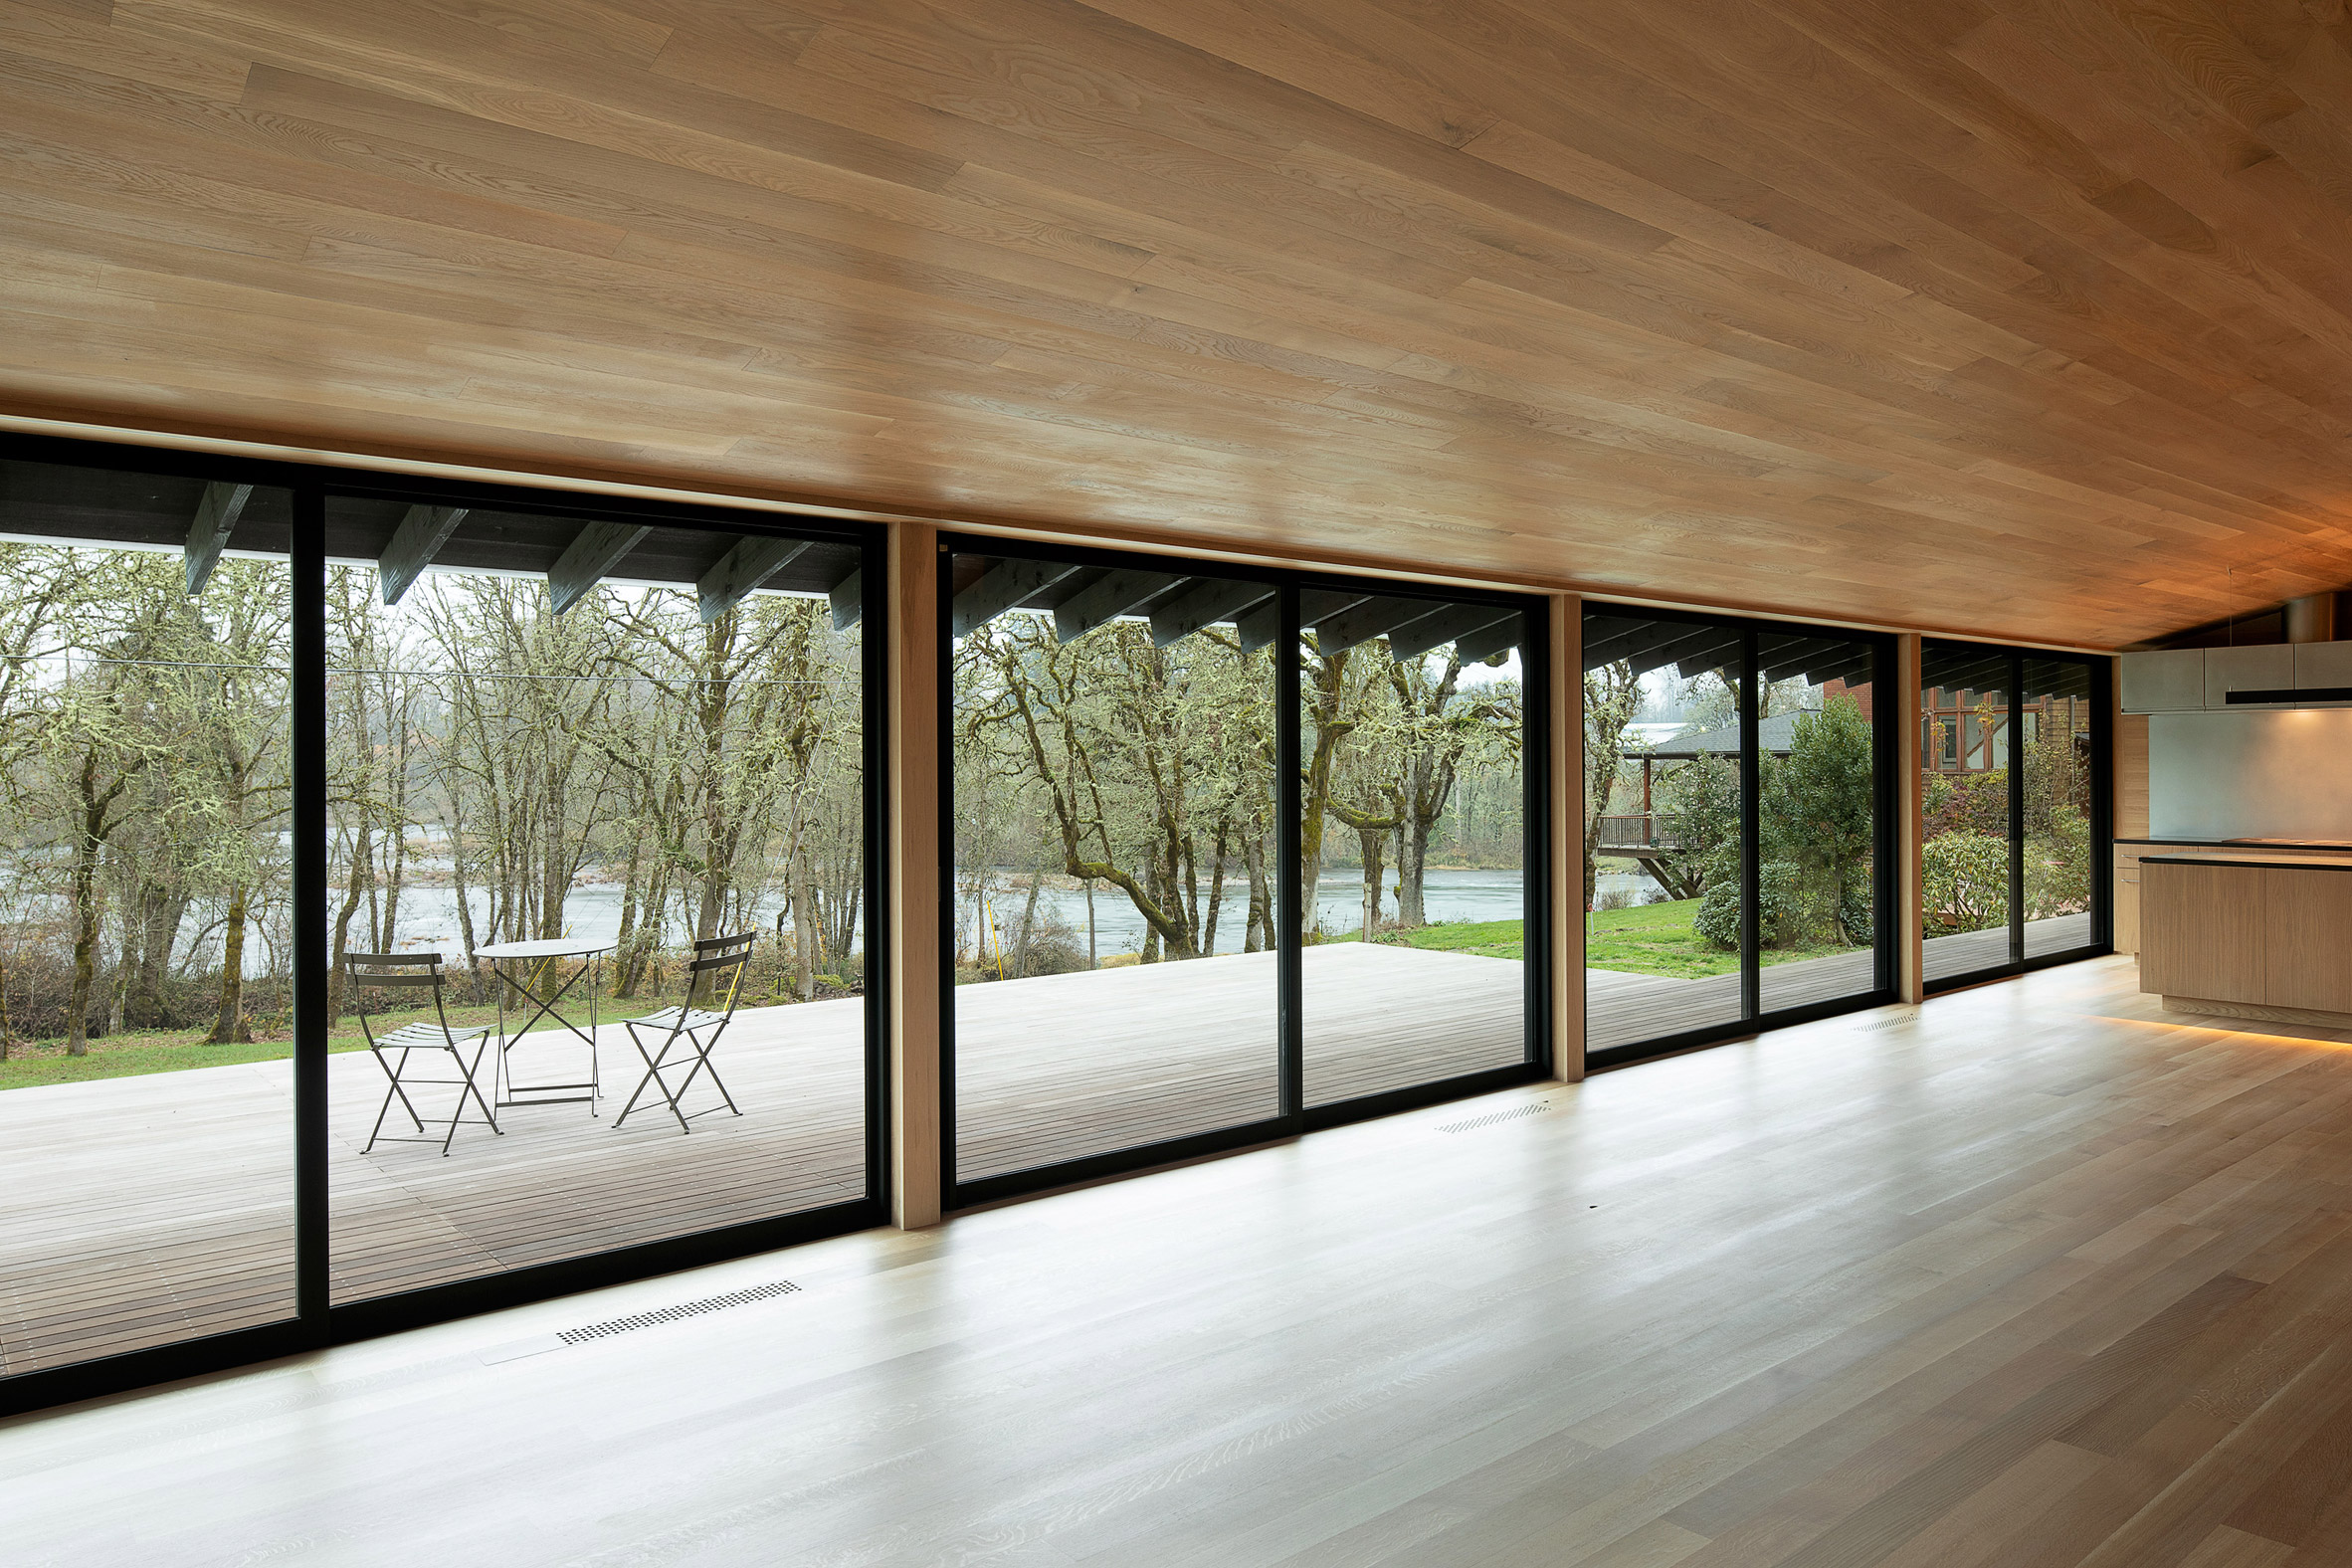 White oak forms the house's interior